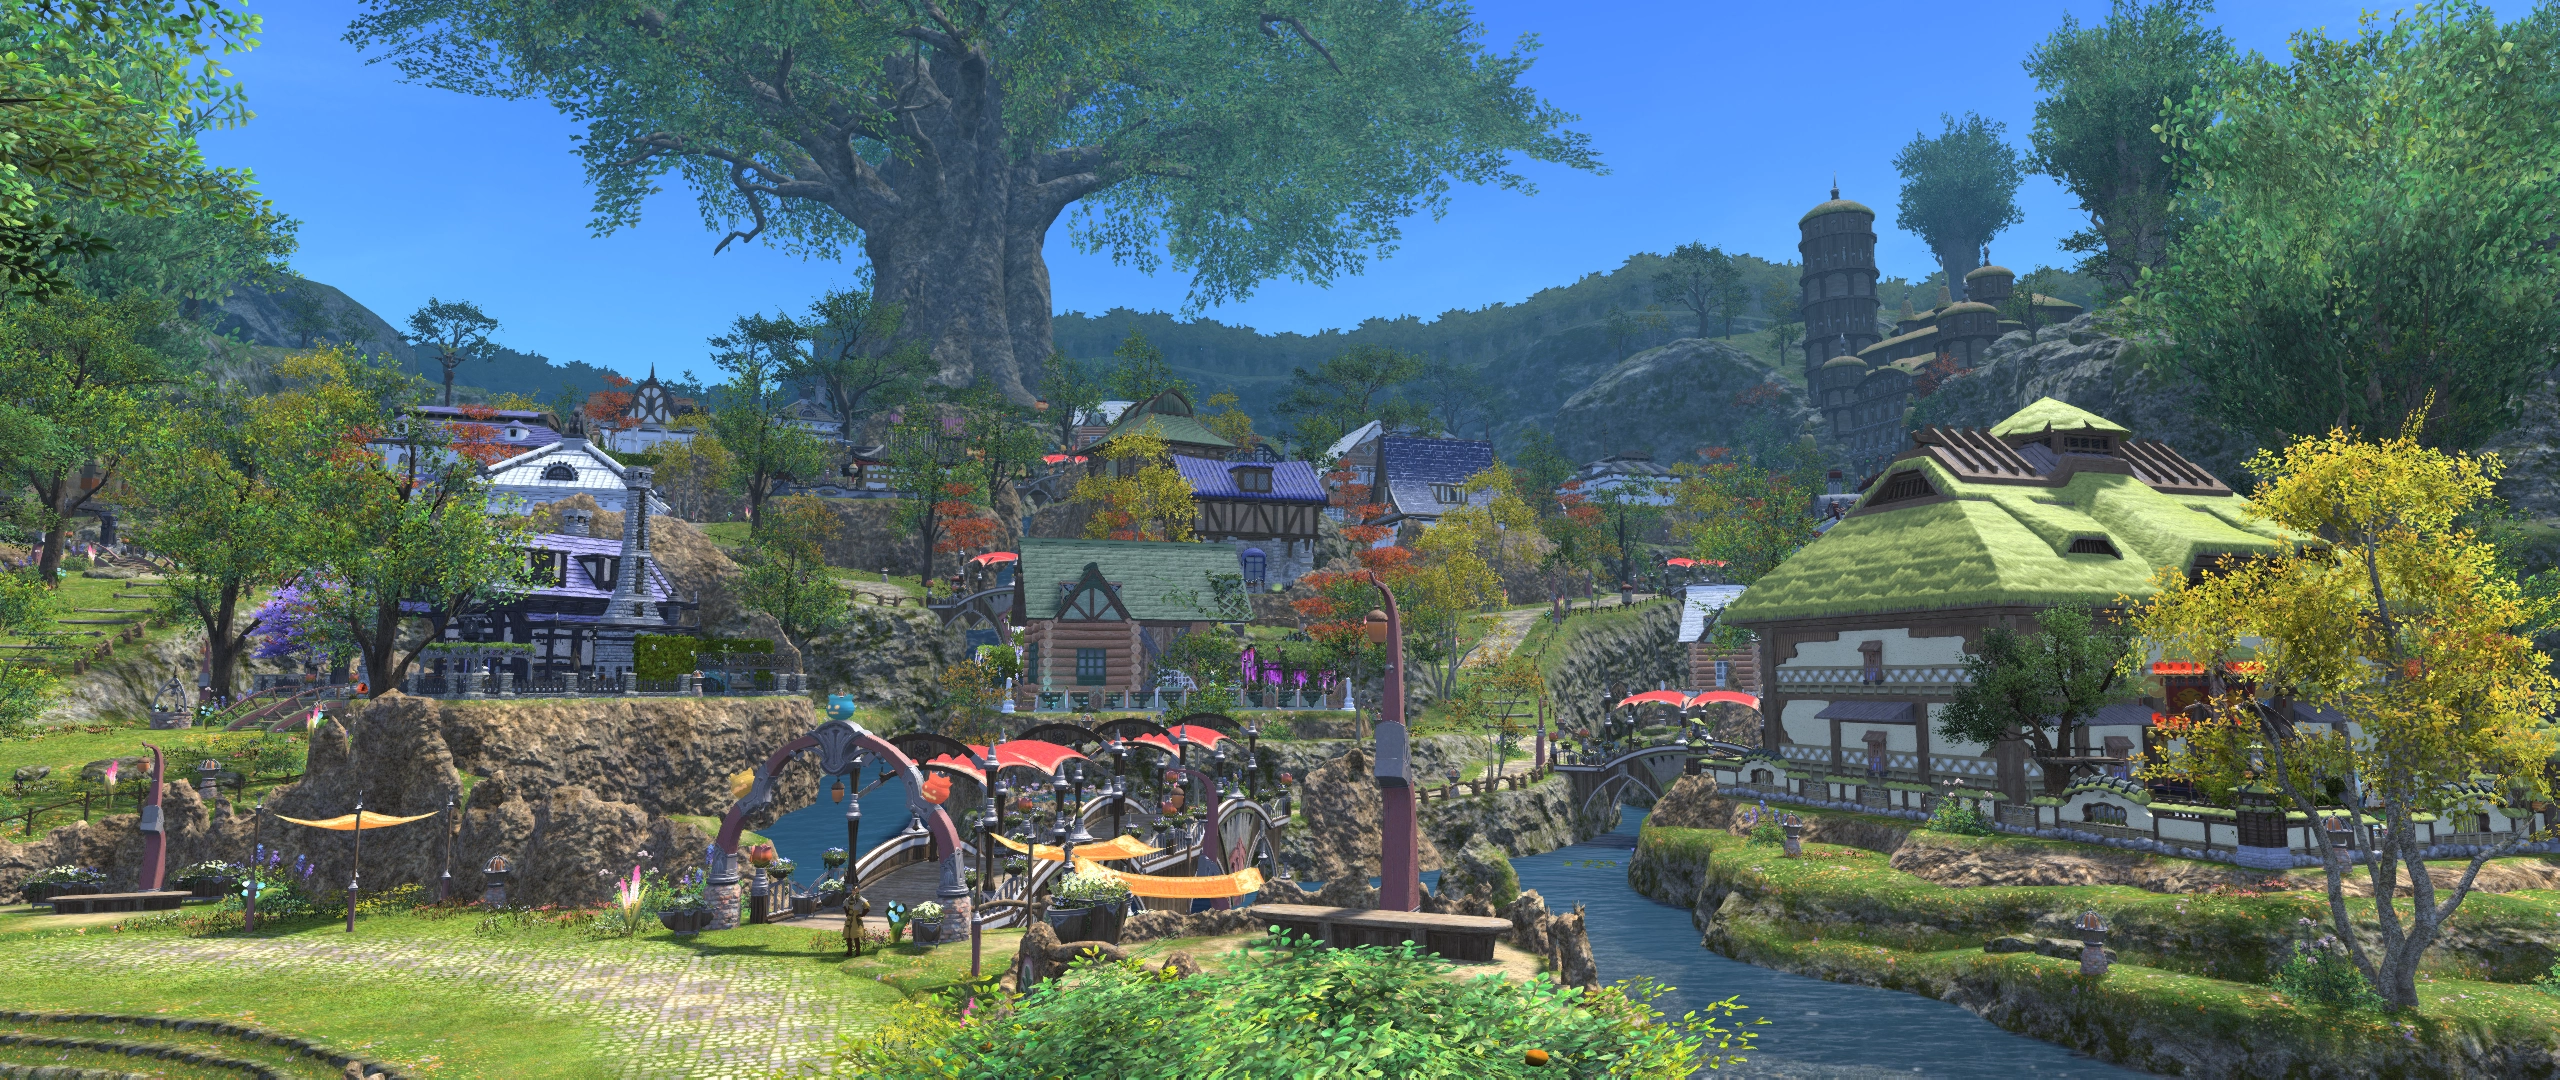 Lavender Beds Residential District